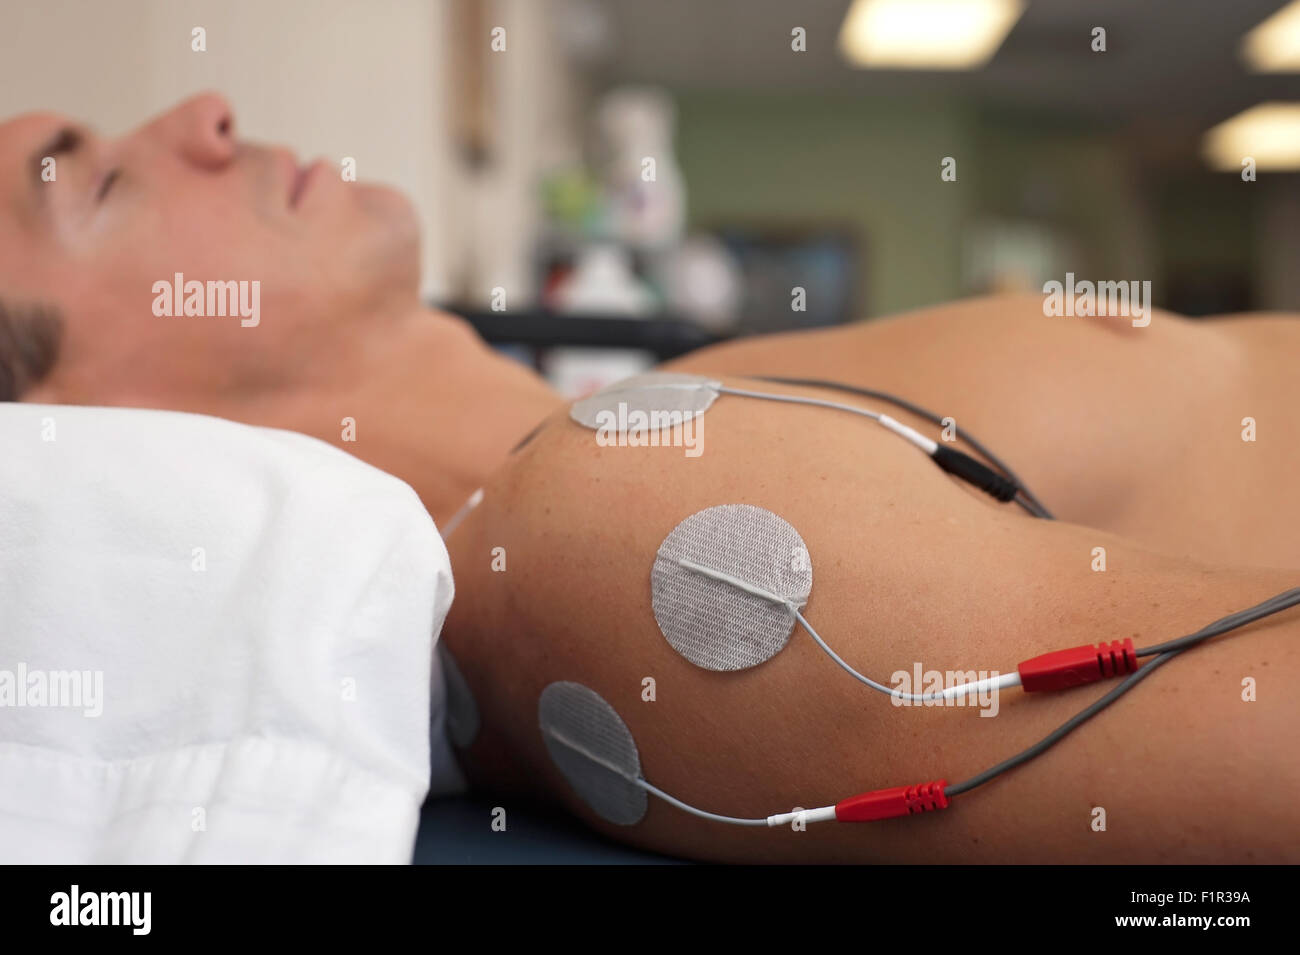 Treatment of a male patient's shoulder using transcutaneous, interferential, electrical stimulation. Stock Photo